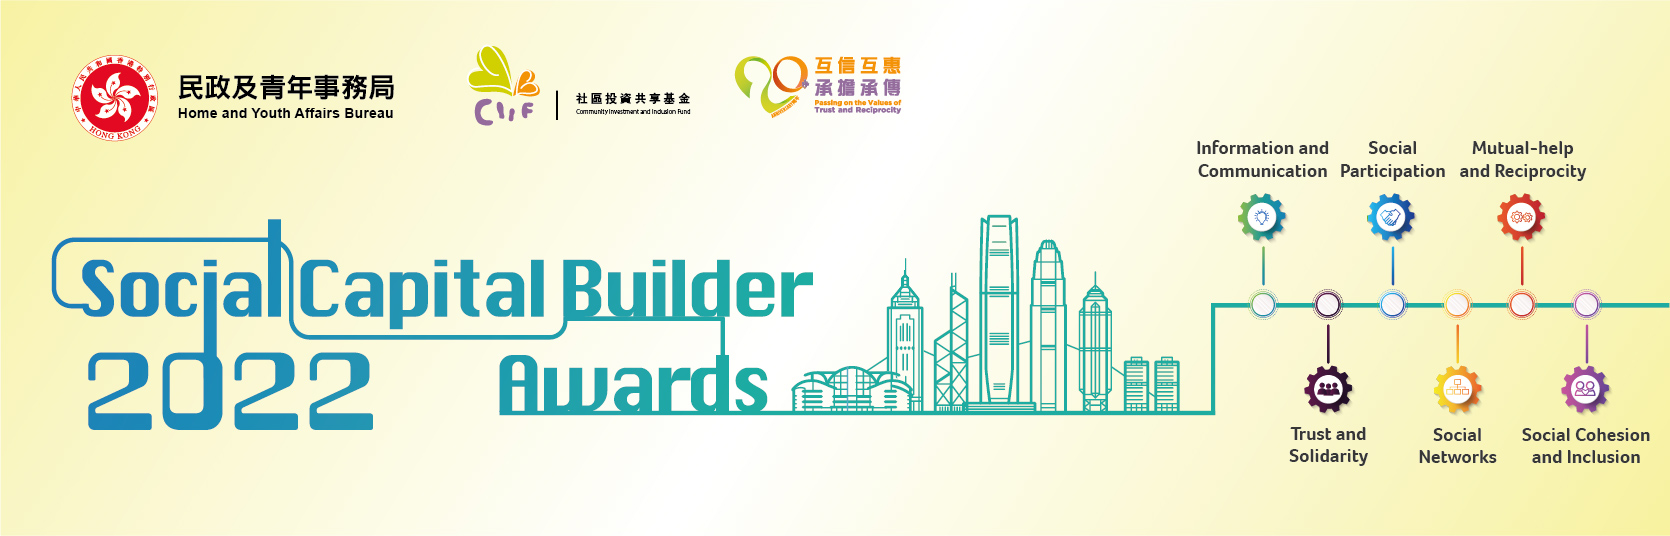 Social Capital Builder Awards 2022 is Open for Application